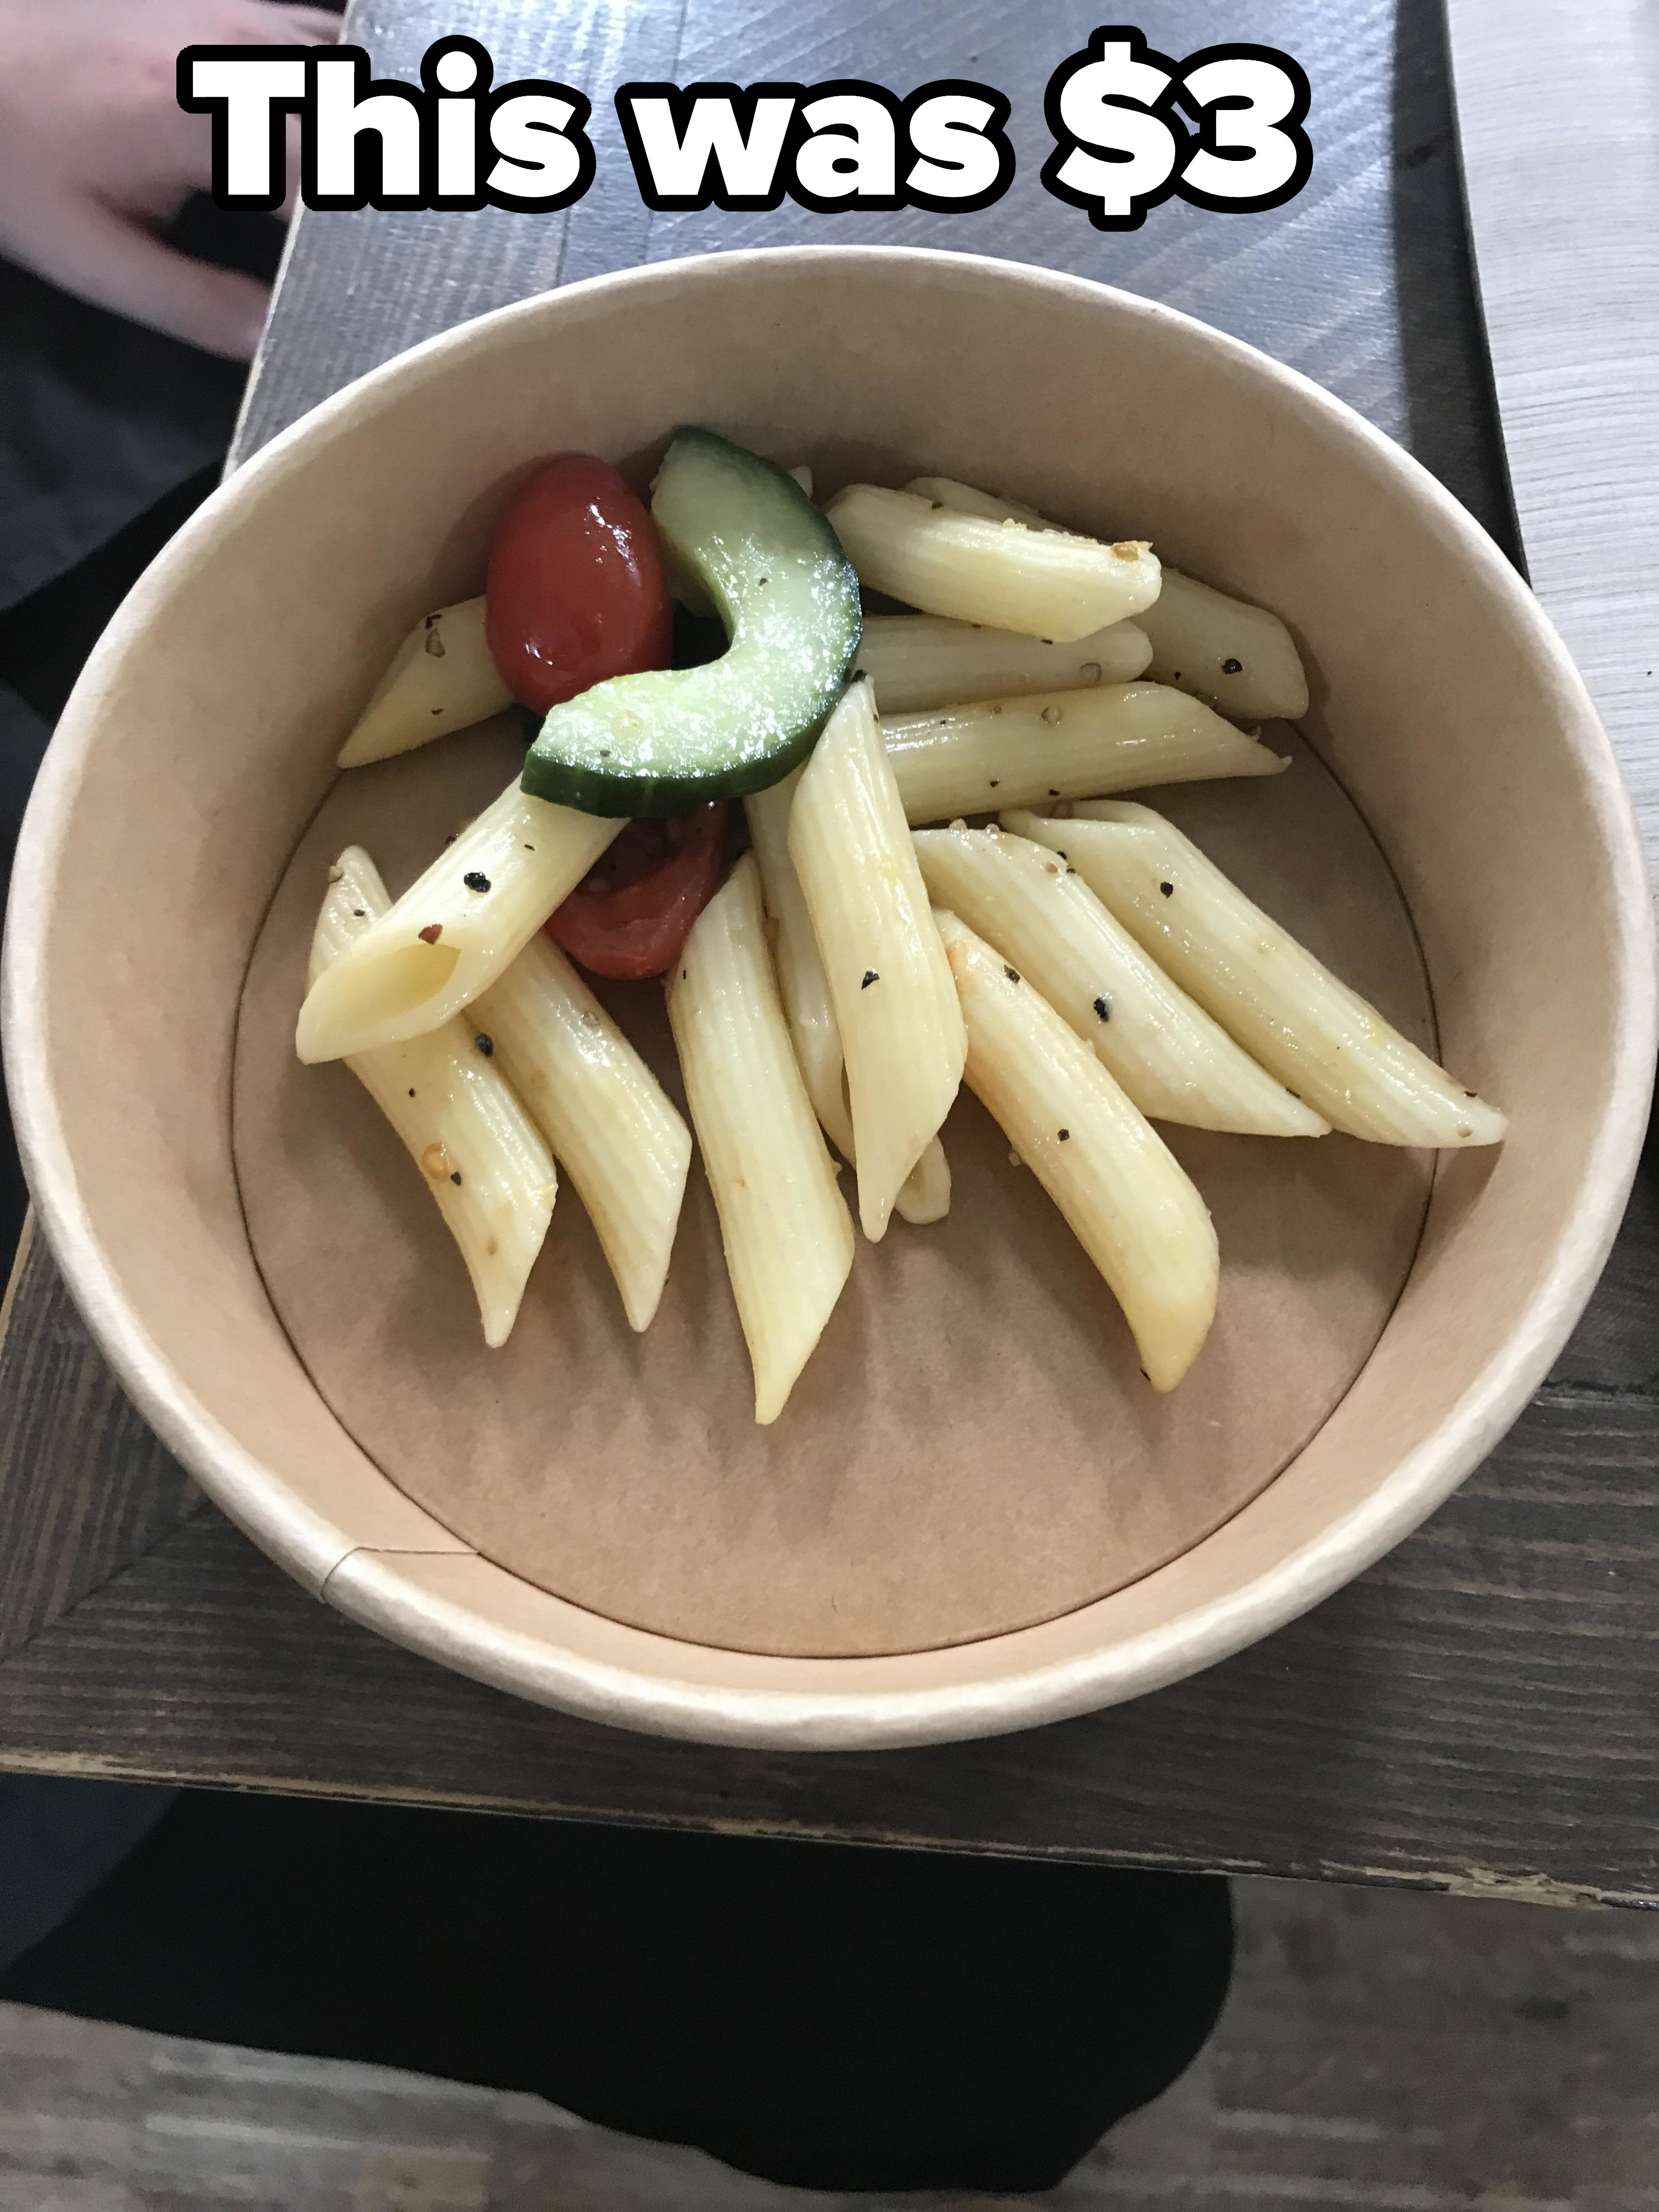 a small bowl of bad looking pasta